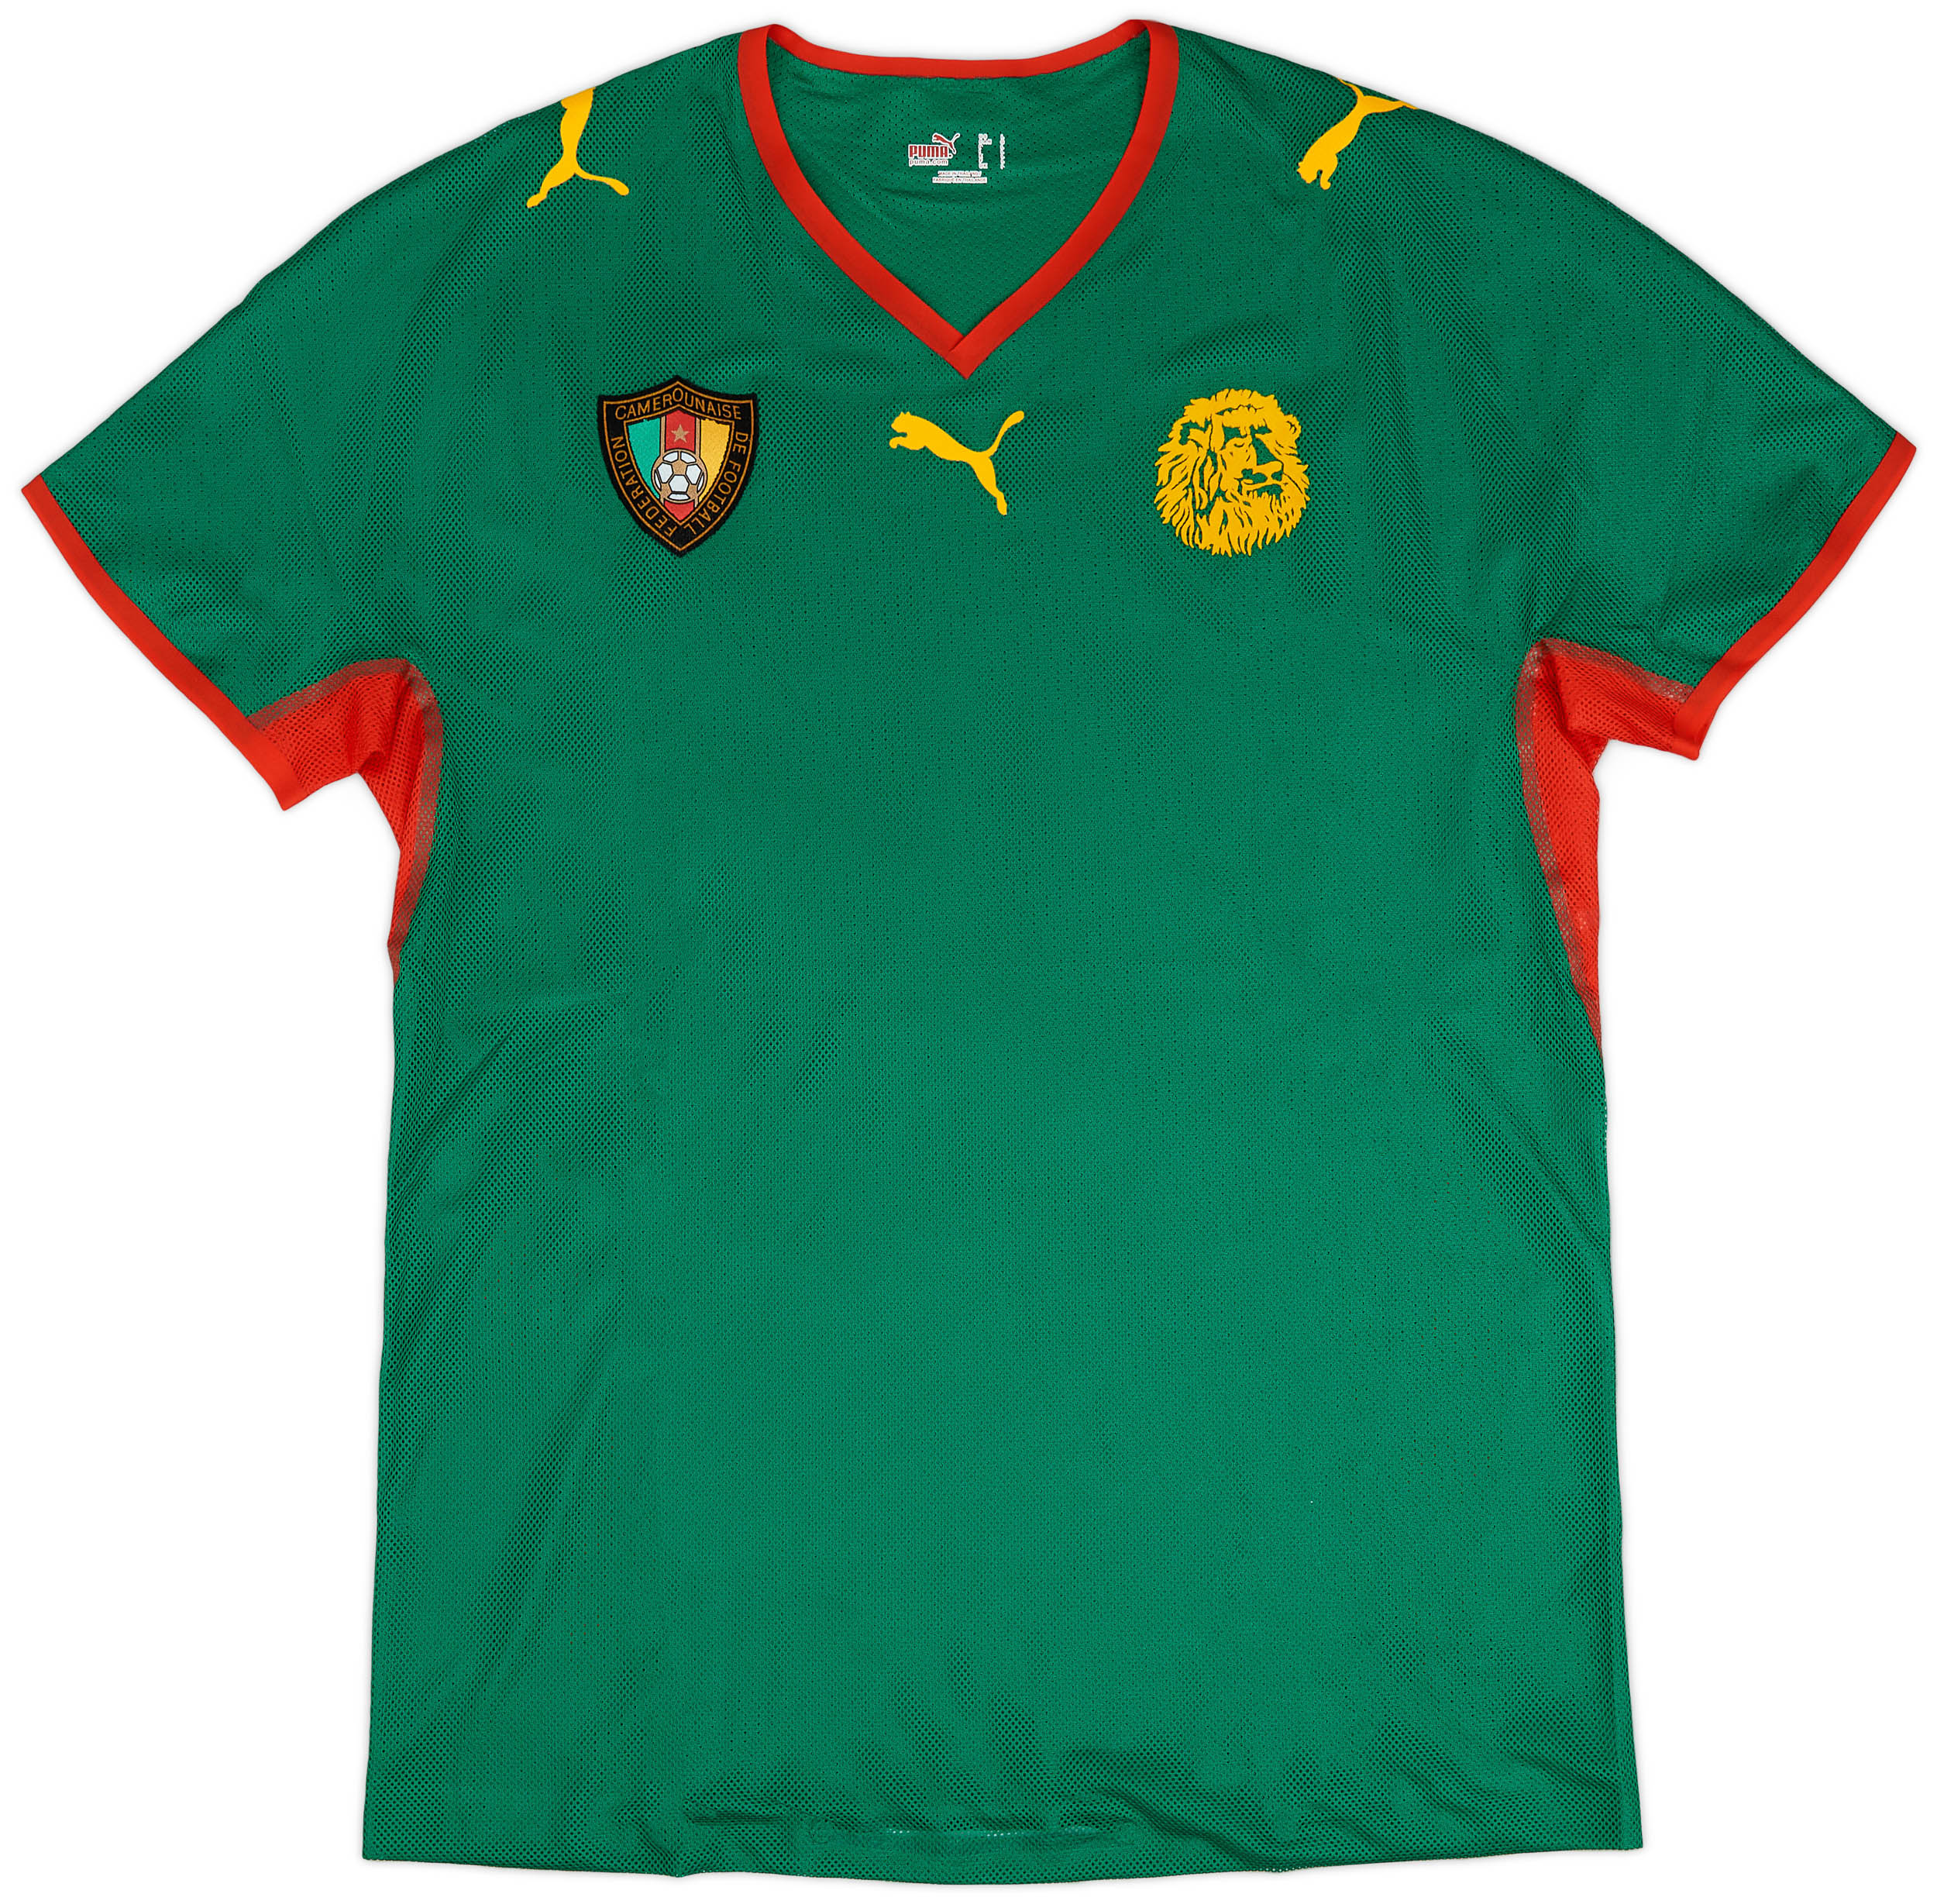 2008-09 Cameroon Player Issue Home Shirt - 9/10 - ()